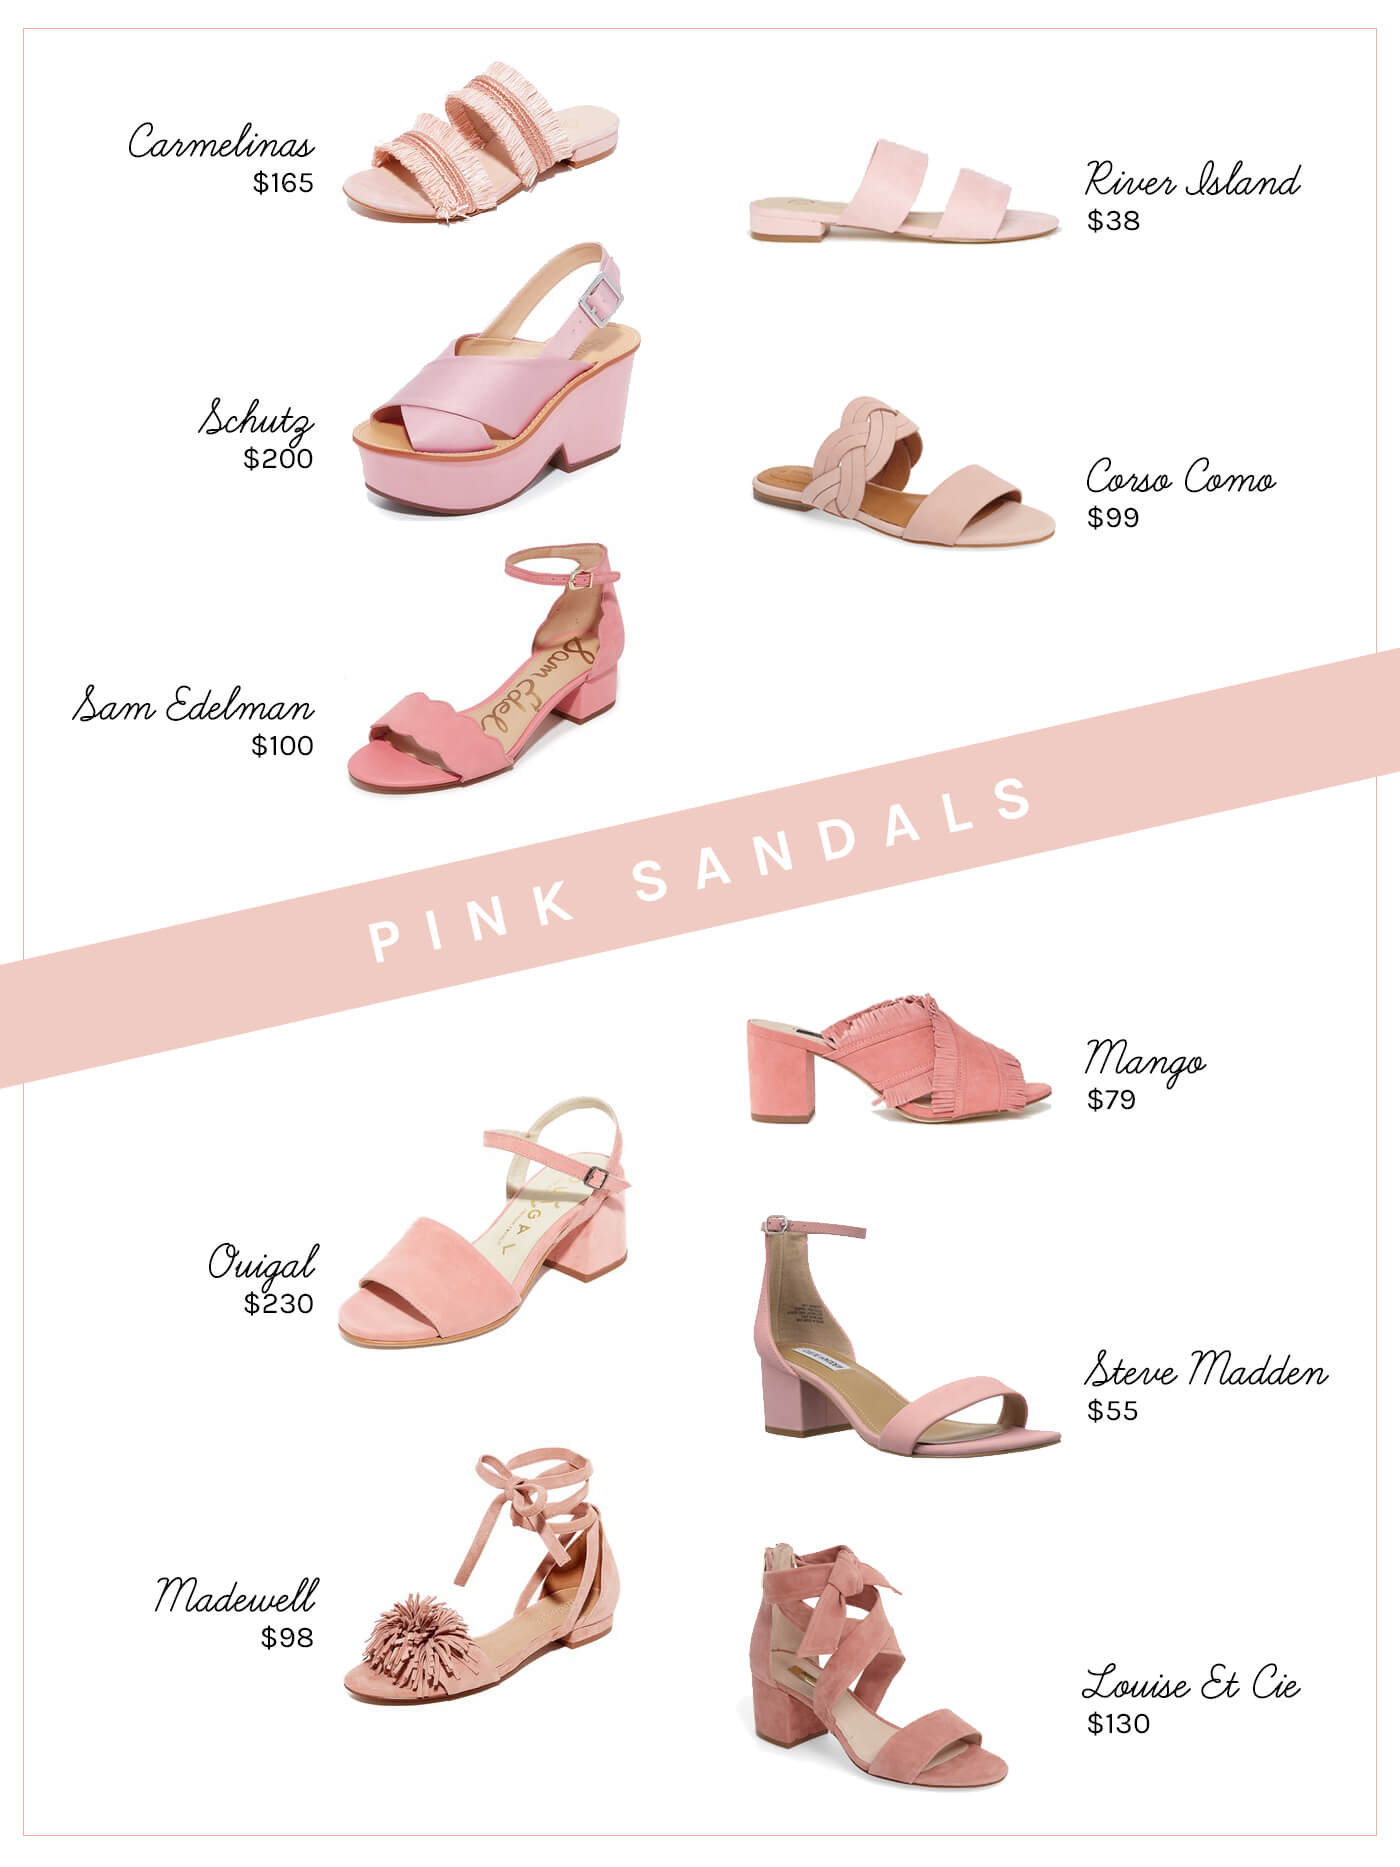 Think Pink: 10 Pink Sandals for Spring and Summer - Keiko Lynn